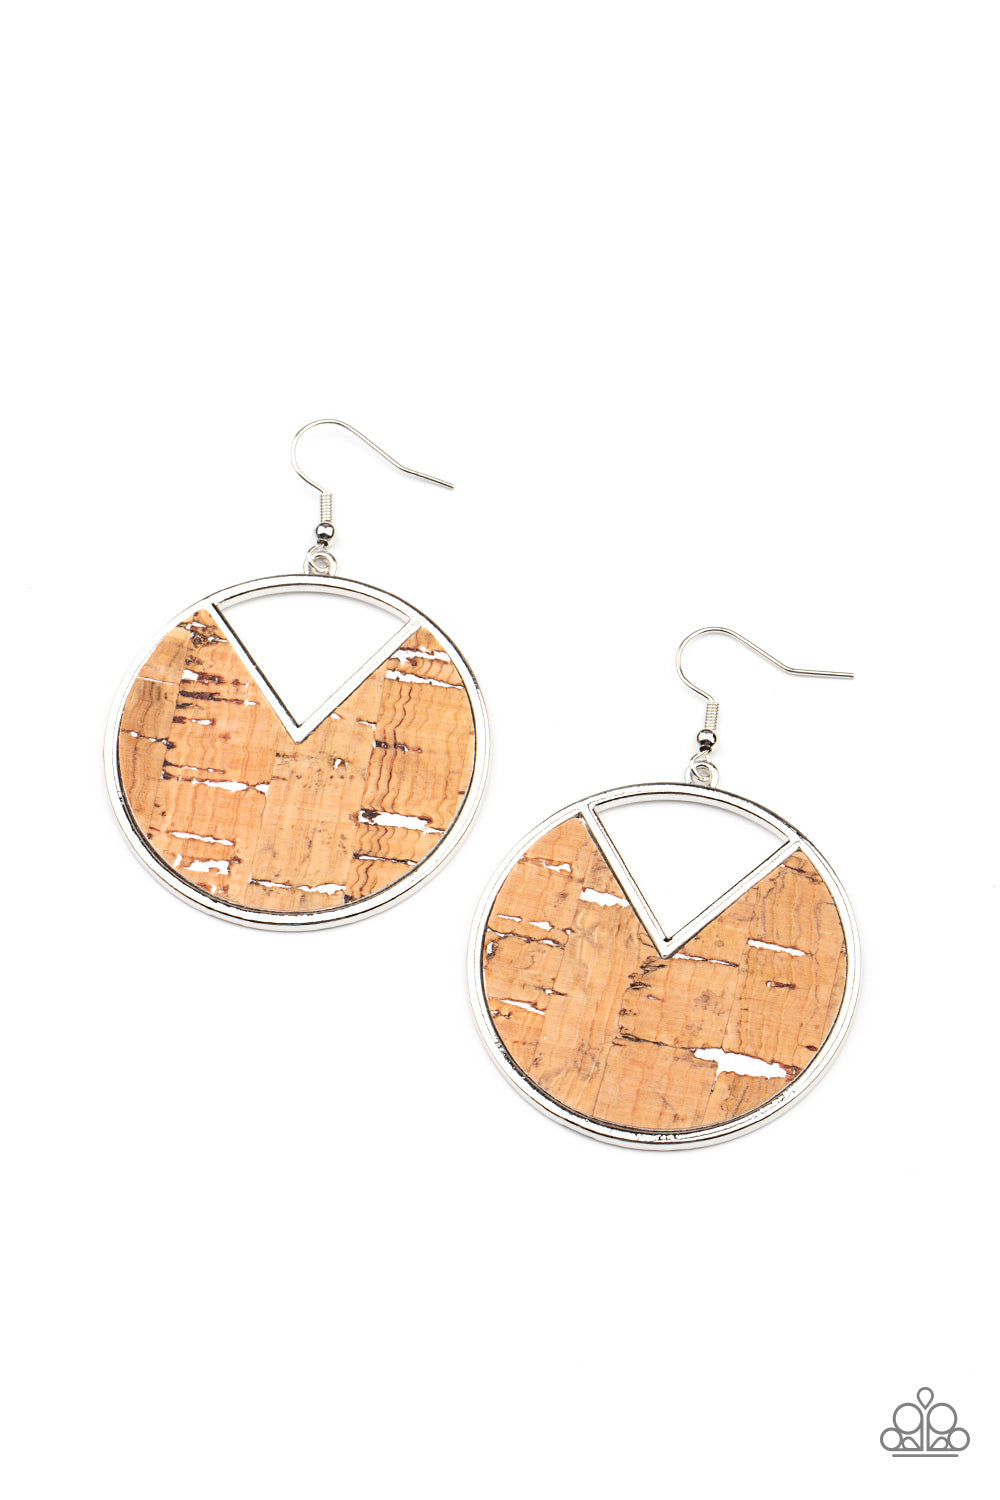 Nod to Nature - White Cork Earrings - Paparazzi Accessories featuring hints of white accents, an earthy piece of cork is placed into the center of a circular hoop. A triangular slice is removed from the cork, creating an edgy airy finish. Earring attaches to a standard fishhook fitting.  Sold as one pair of earrings.